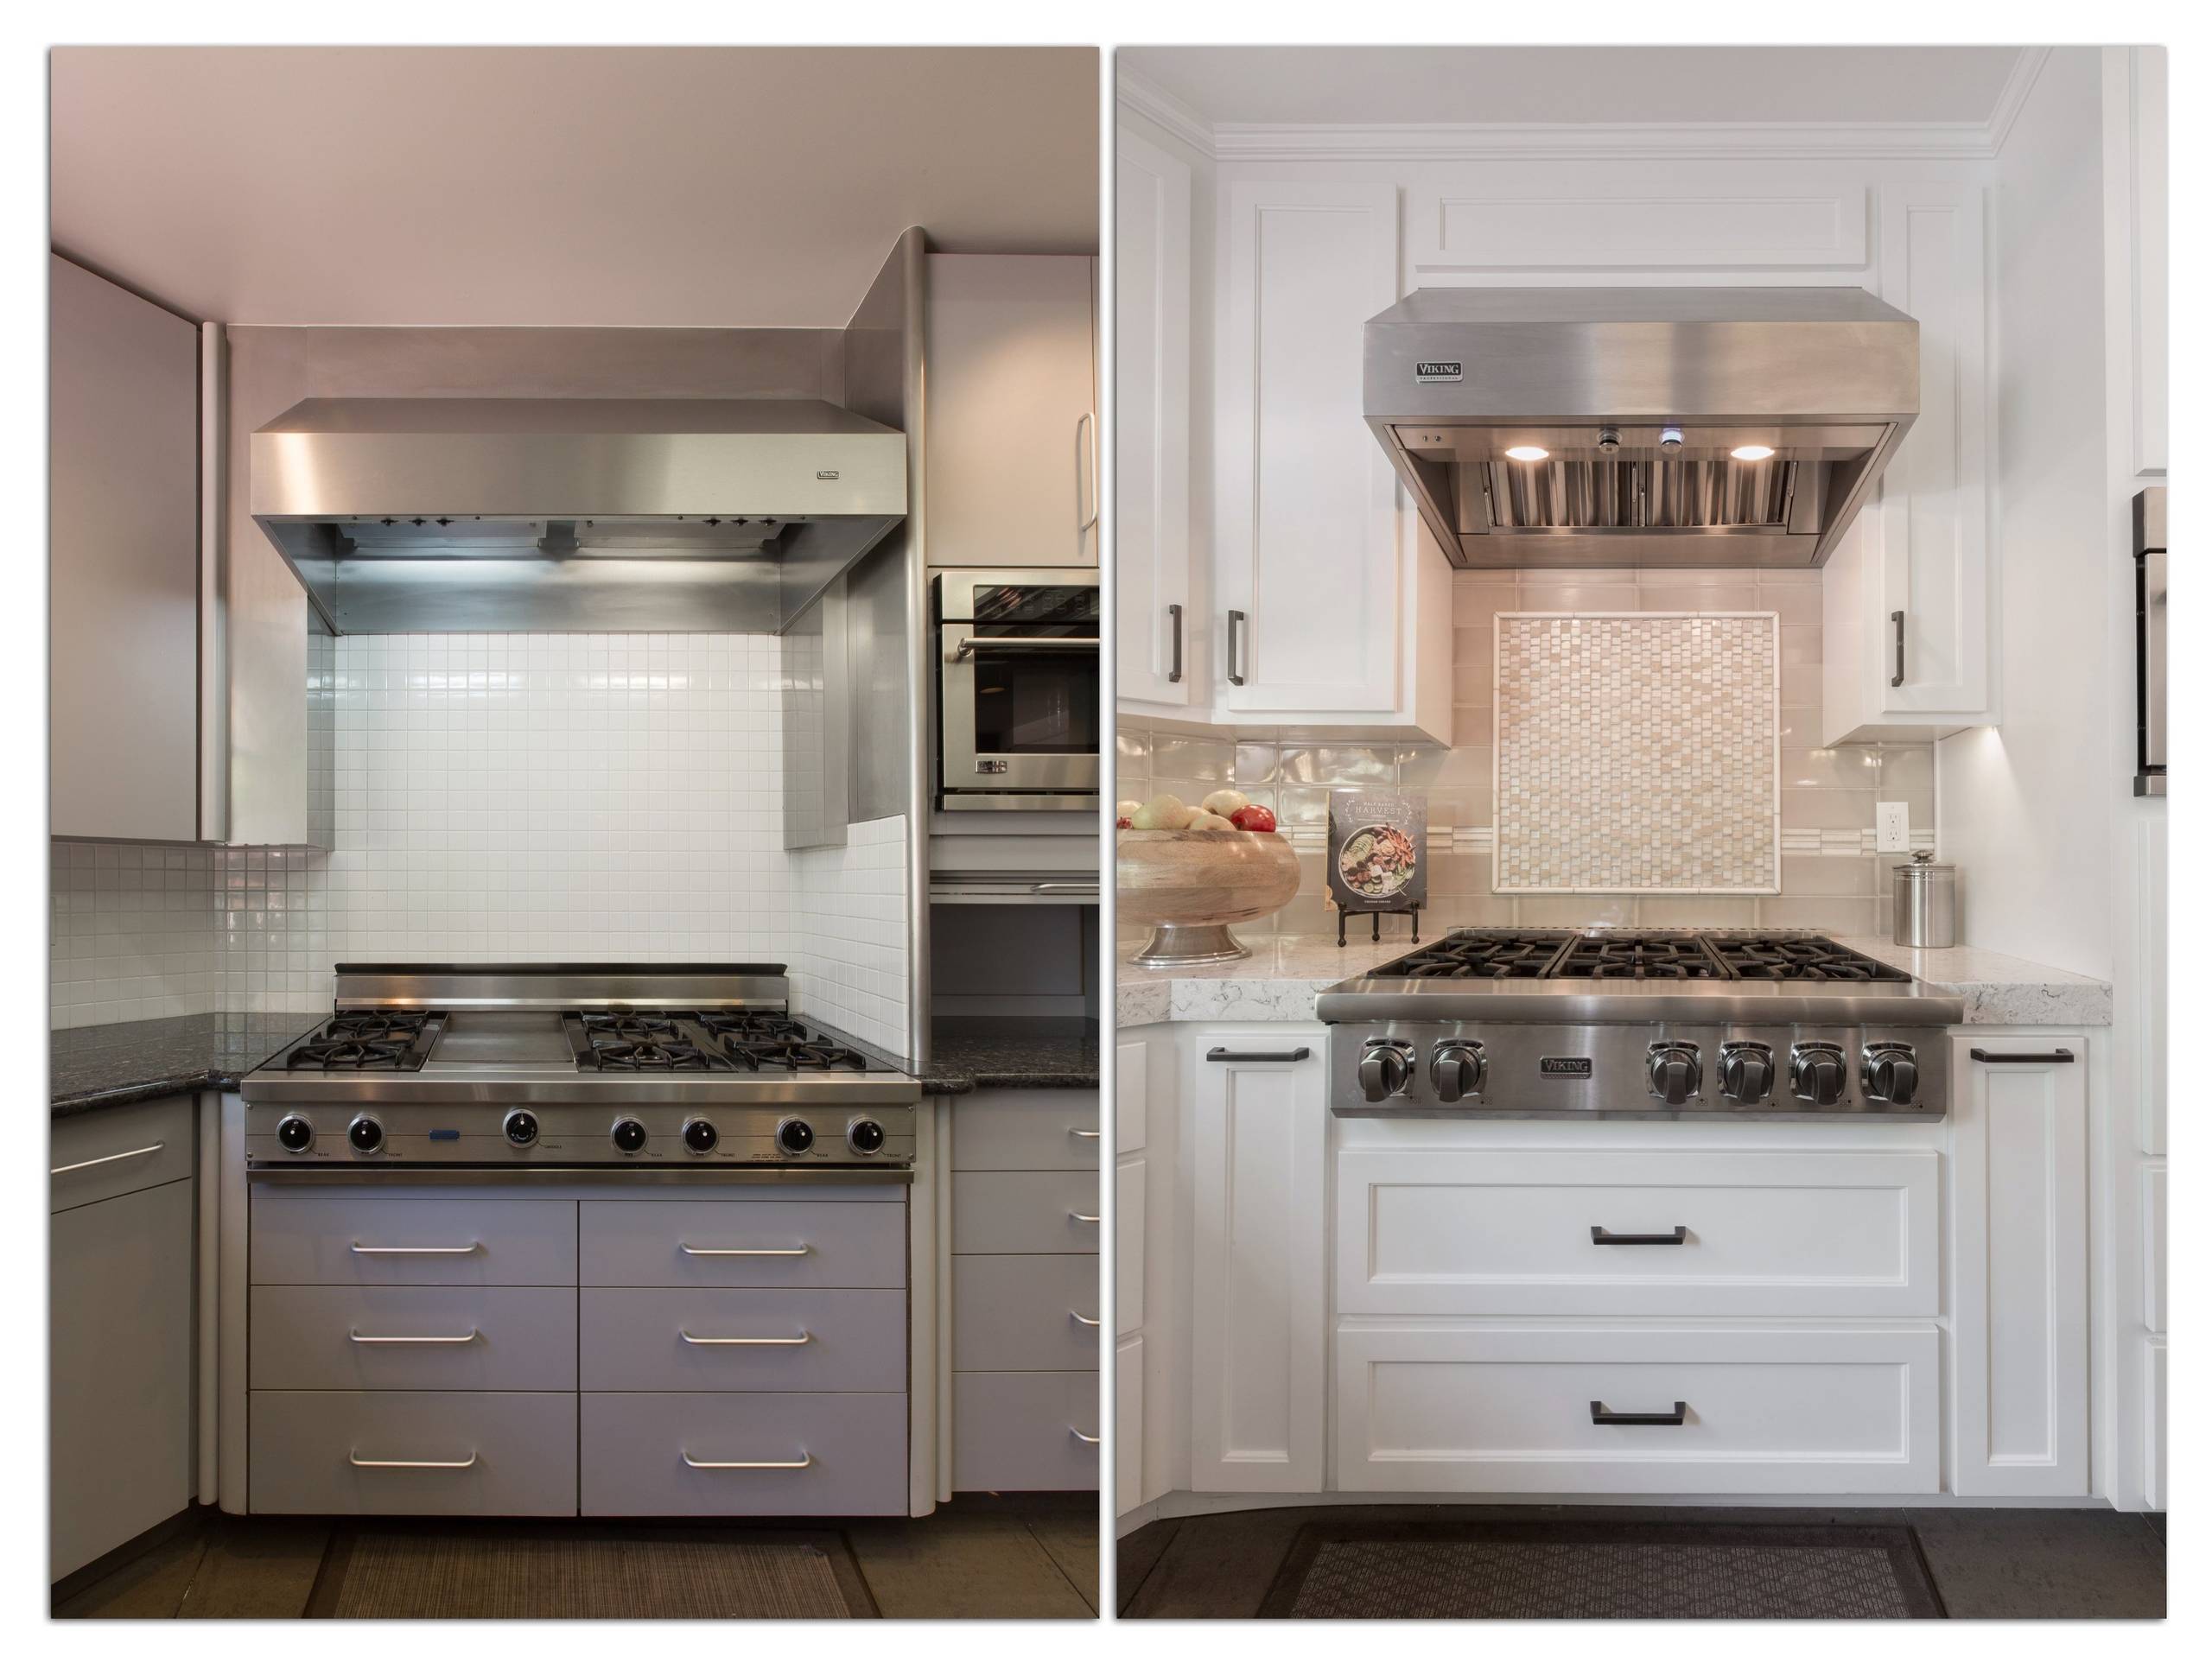 Dutchollow Kitchen Before and After